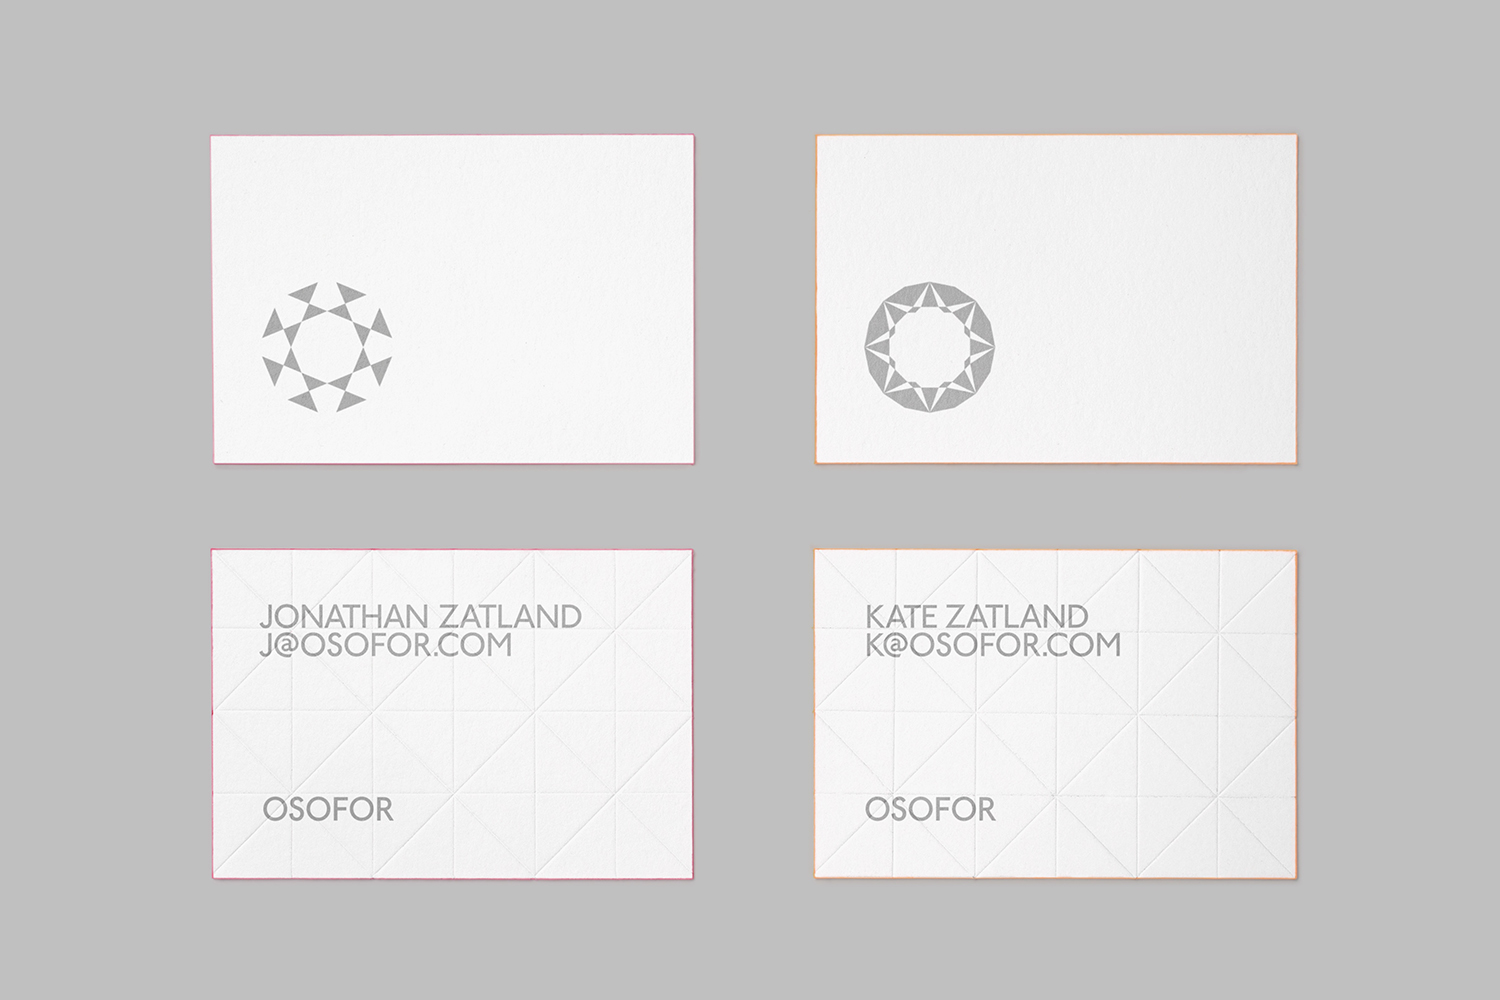 Logo and edge painted and blind embossed business cards designed by Paul Belford Ltd. for lab diamond business Osofor